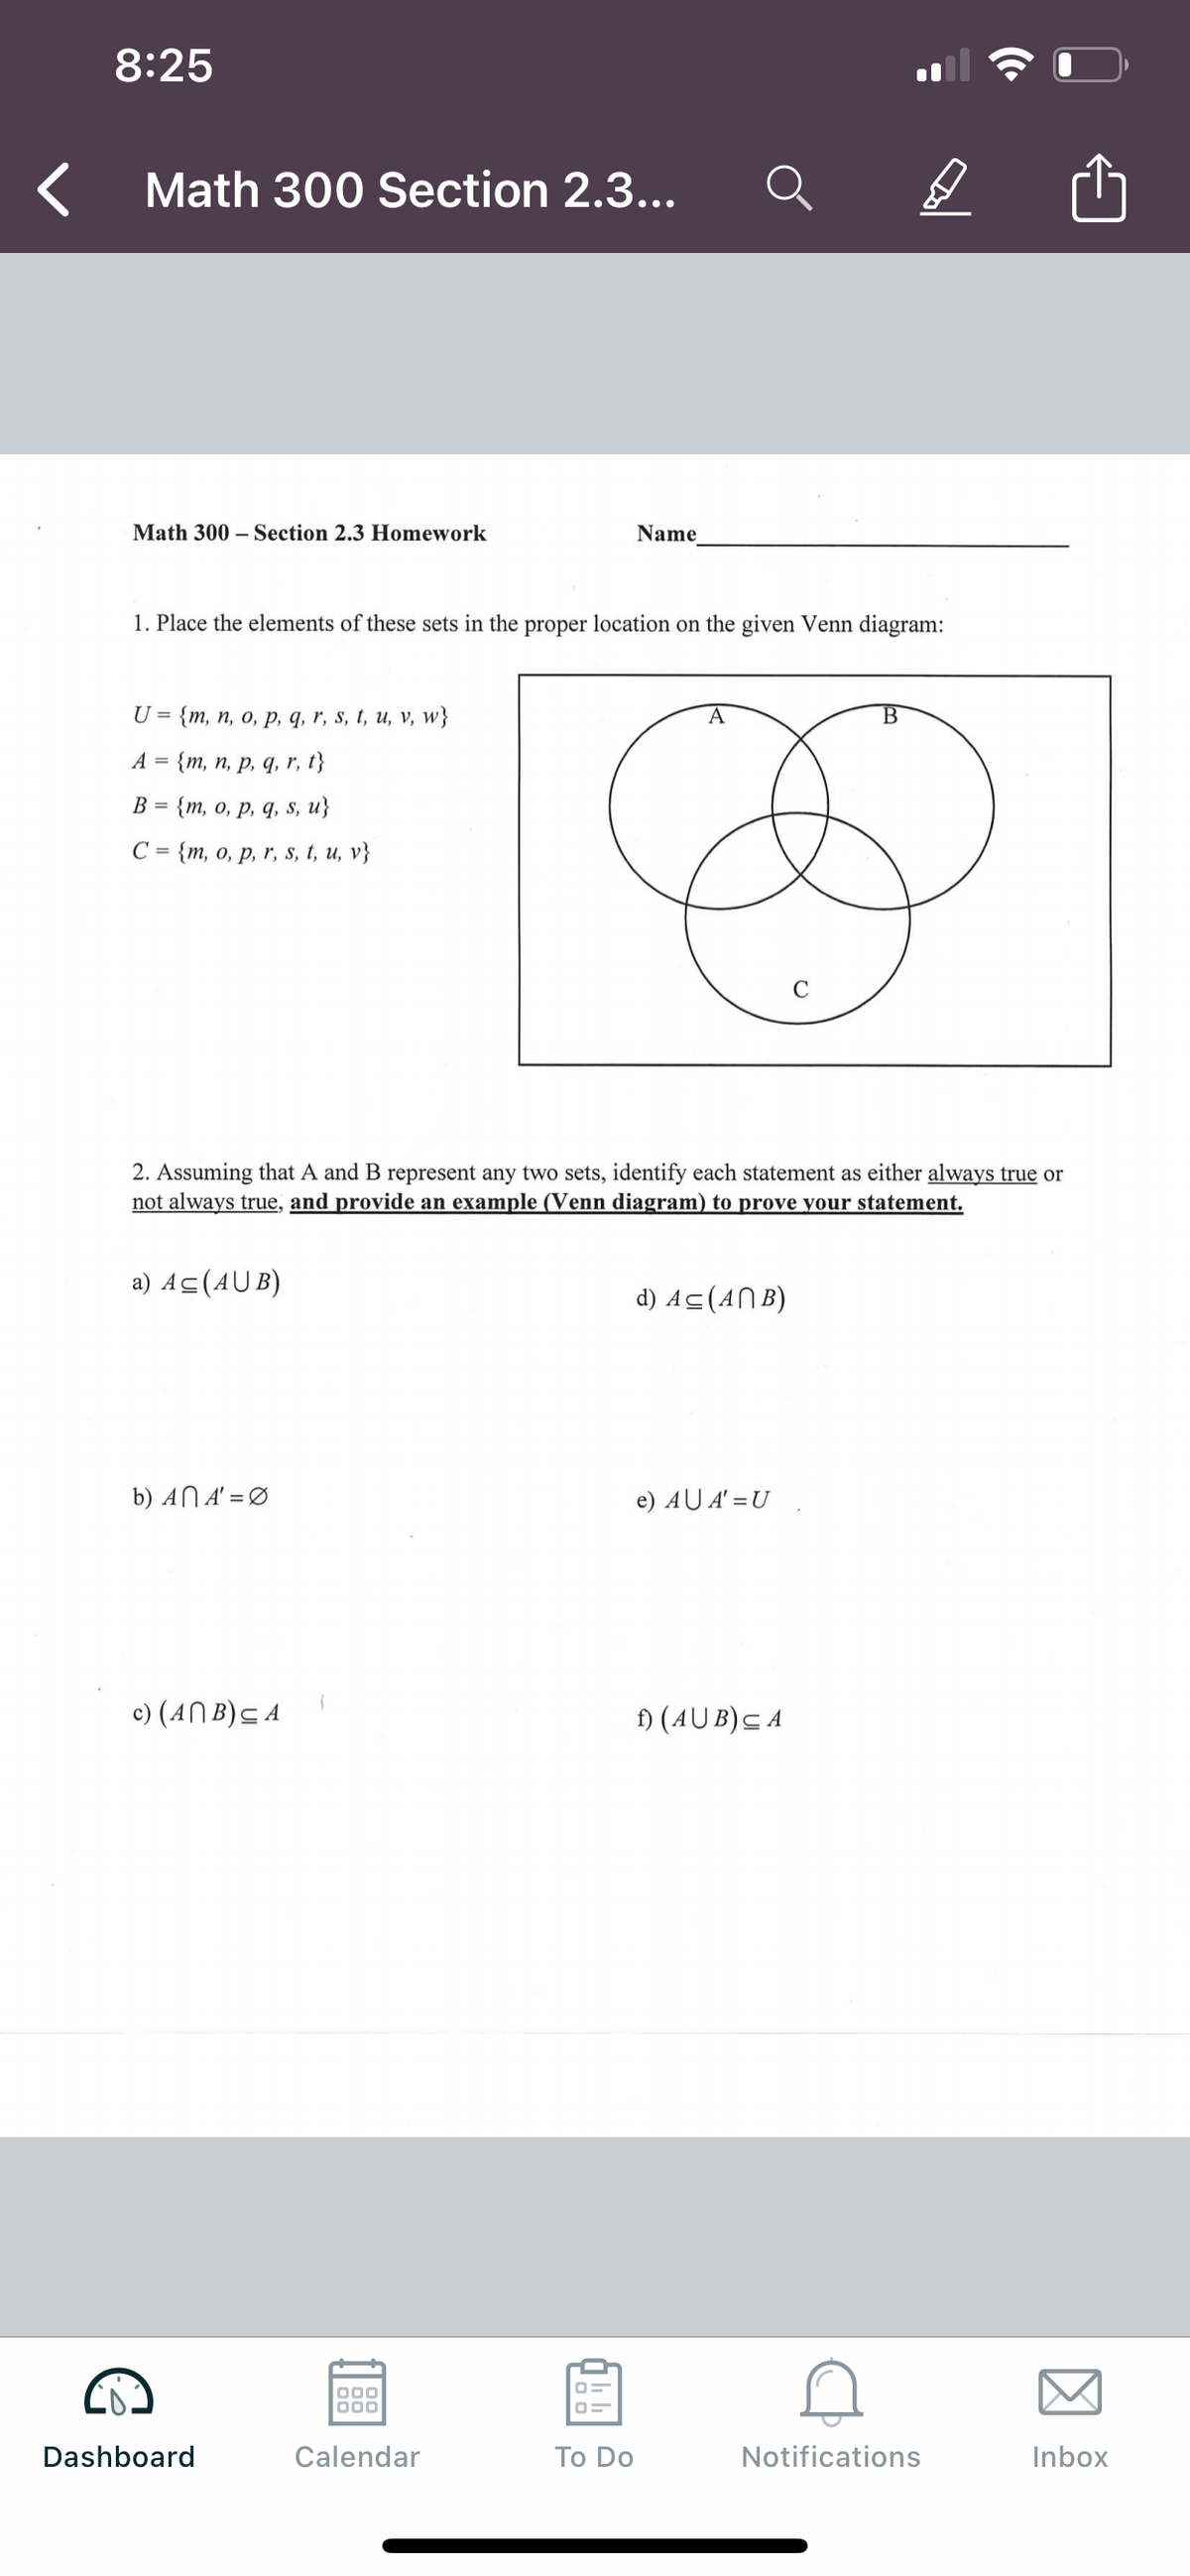 8:25
Math 300 Section 2.3...
Math 300 – Section 2.3 Homework
Name
1. Place the elements of these sets in the proper location on the given Venn diagram:
U
{т, п, о, р, q, r, s, t, и, v, w}
A
B
A
{т, п, р, q, r, 1}
В
{т, о, р, q, s, и}
С 3 {m, о, р, r, s, t, и, v}
C
2. Assuming that A and B represent any two sets, identify each statement as either always true or
not always true, and provide an example (Venn diagram) to prove your statement.
a) Ac(AU B)
d) Ac(AN B)
b) AN A' = Ø
e) AU A' =U
c) (ANB)C A
) (AU B)C A
000
Dashboard
Calendar
Тo Do
Notifications
Inbox
